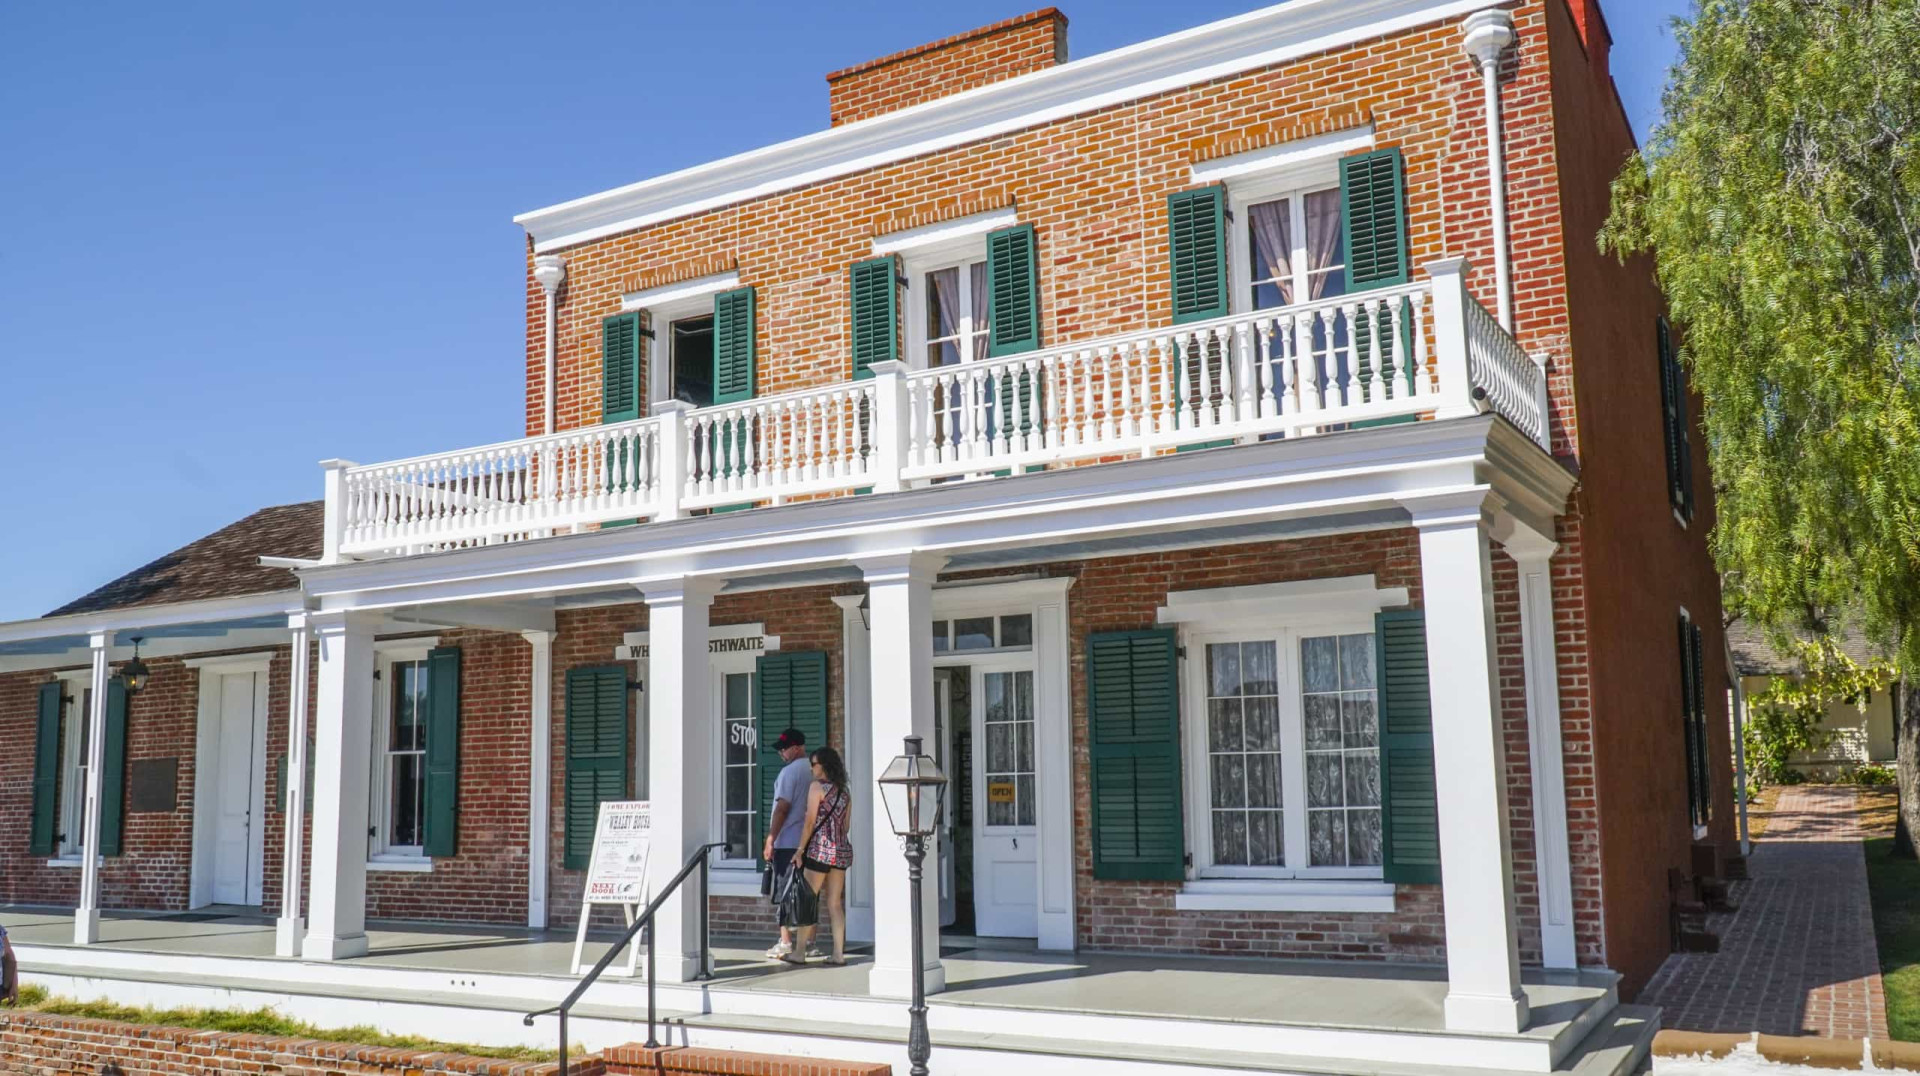 <p>A California Historic Landmark, Whaley House is reputedly the most haunted house in America. Browse the museum and then start ghost hunting. </p><p>You may also like:<a href="https://www.starsinsider.com/n/249324?utm_source=msn.com&utm_medium=display&utm_campaign=referral_description&utm_content=198095v22en-en"> Daniel Radcliffe and his more than two decades in the spotlight</a></p>